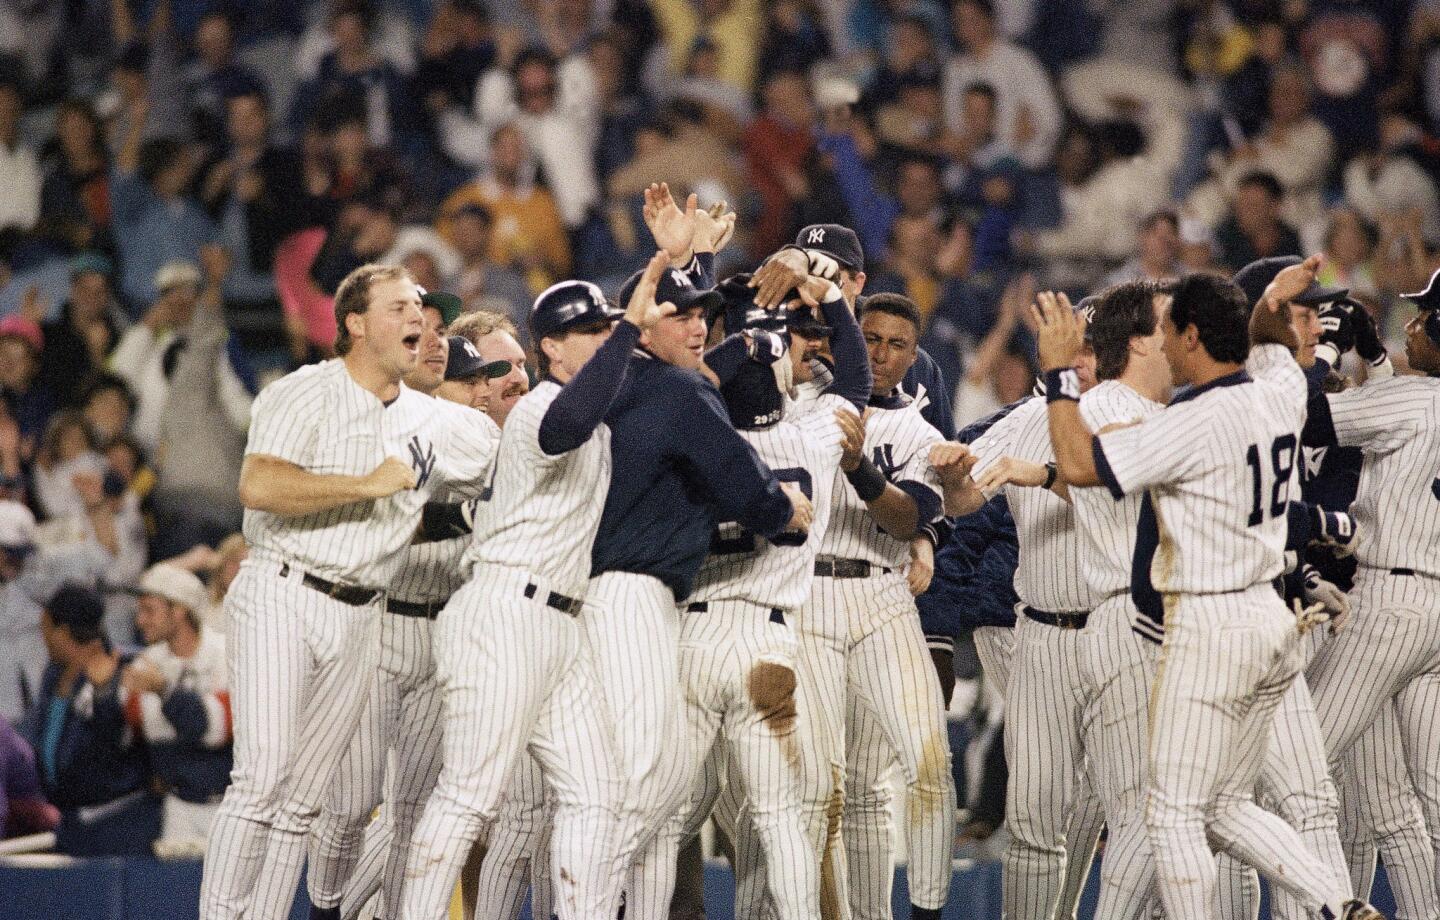 New York Yankees Don Mattingly, second from right, is mobbed by teammates after hitting a two-out, two-RBI single in the bottom of the ninth inning against the Boston Red Sox in New York on Saturday, Sept. 18, 1993. The Yankees won 4-3 when they took advantage of another chance after a fan ran onto the field as an apparent final out was being made. (AP Photo/Mark Lennihan)